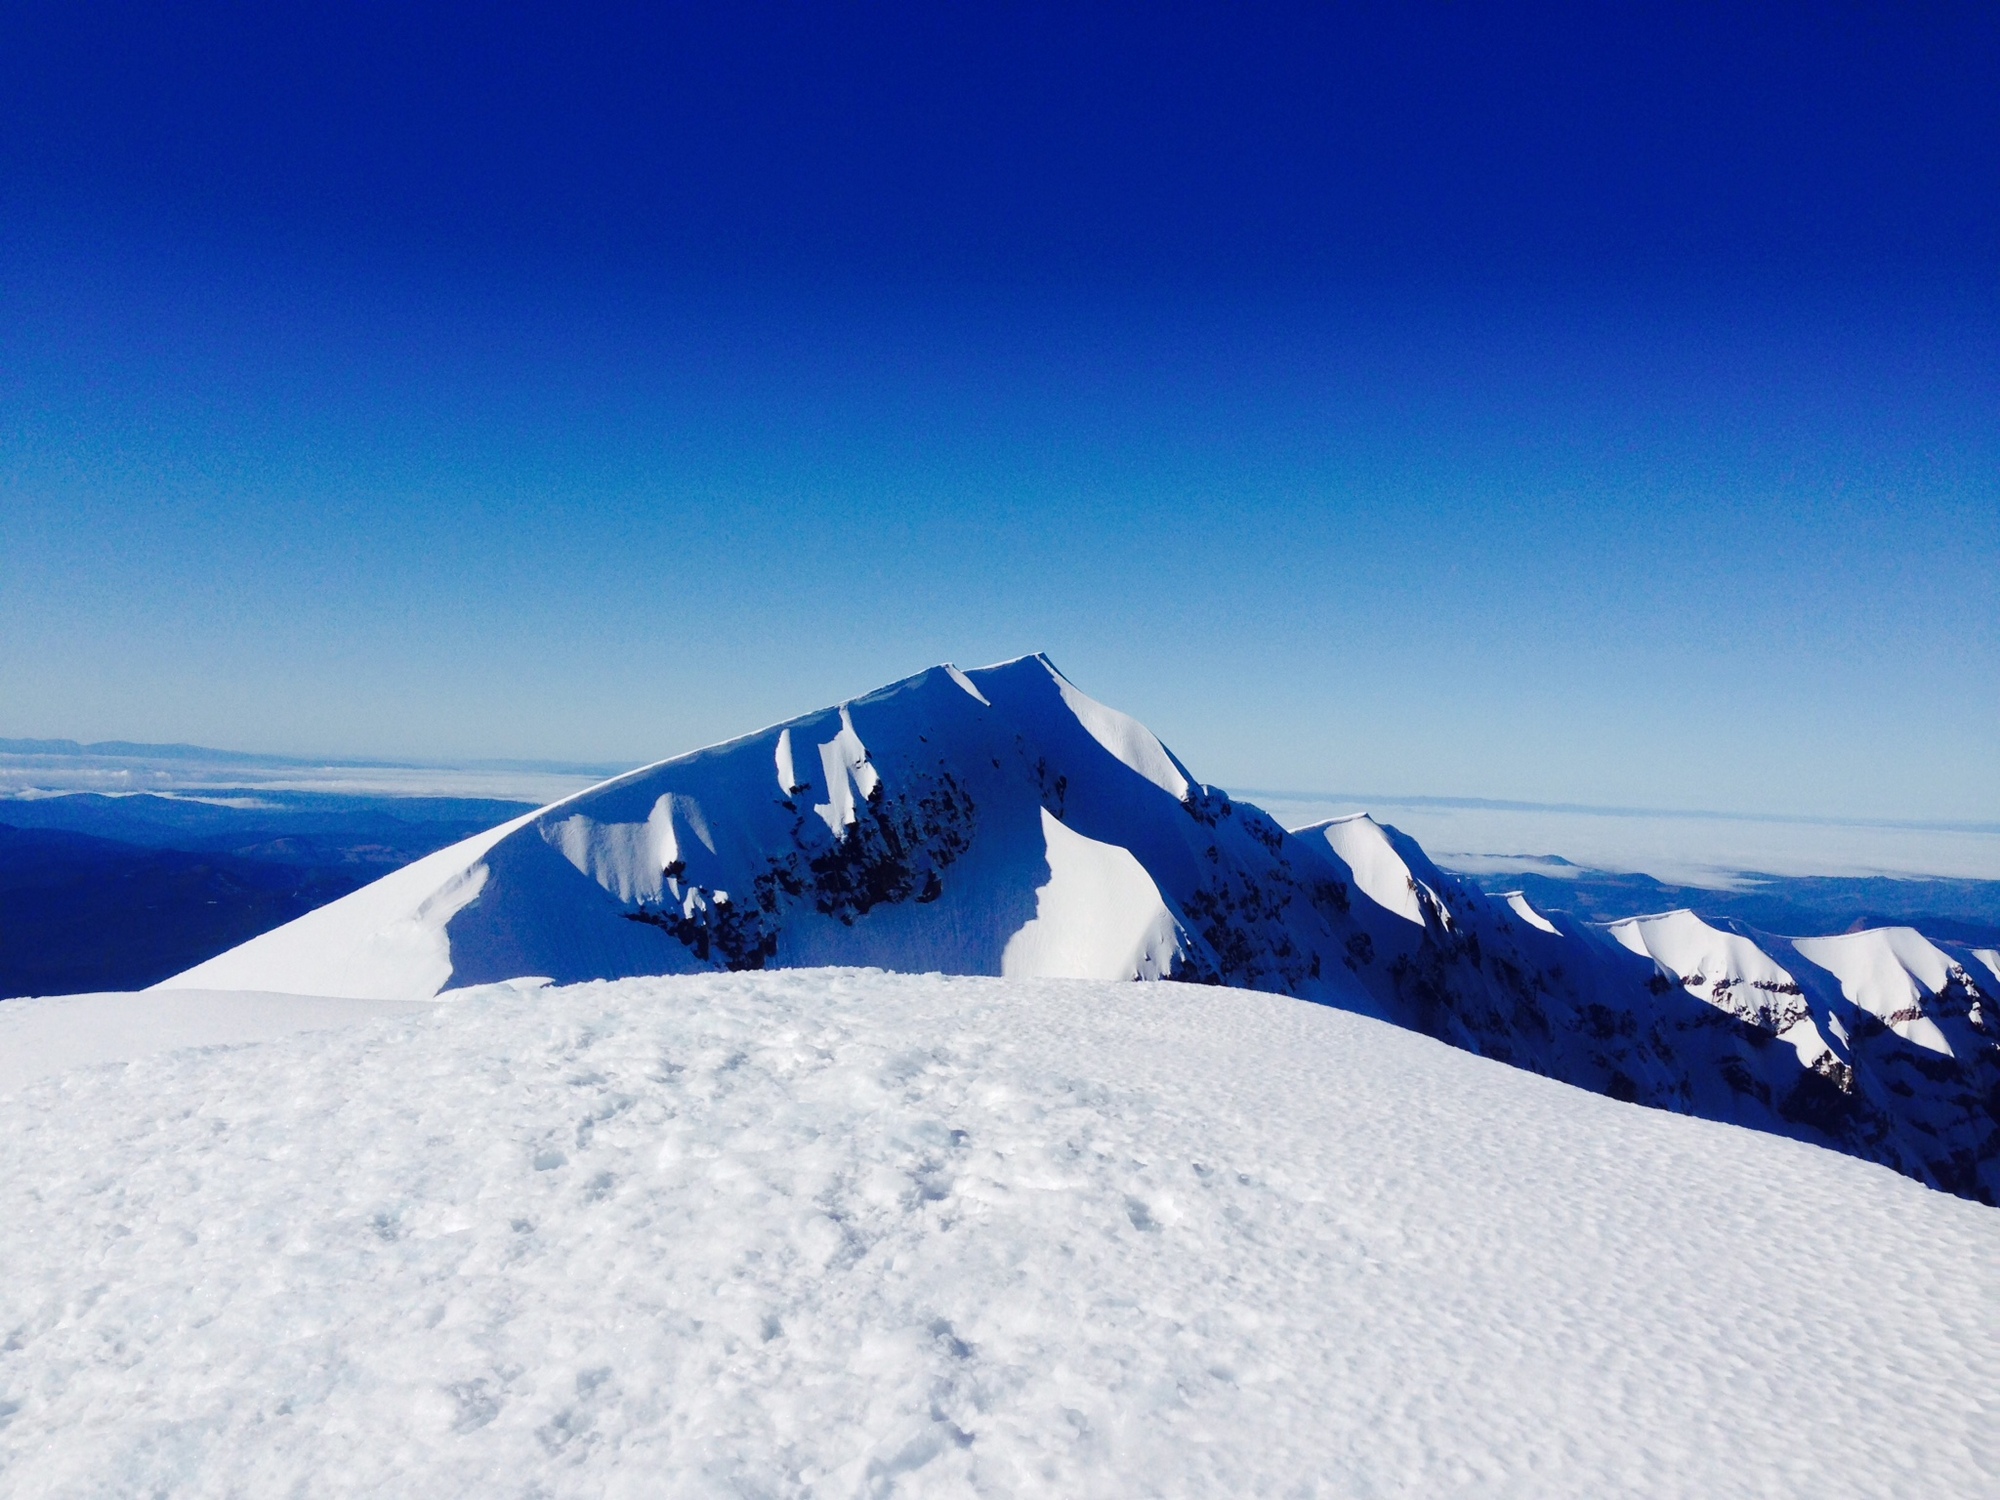 Hiking Mt. St. Helens – The Winter Summit Attempts